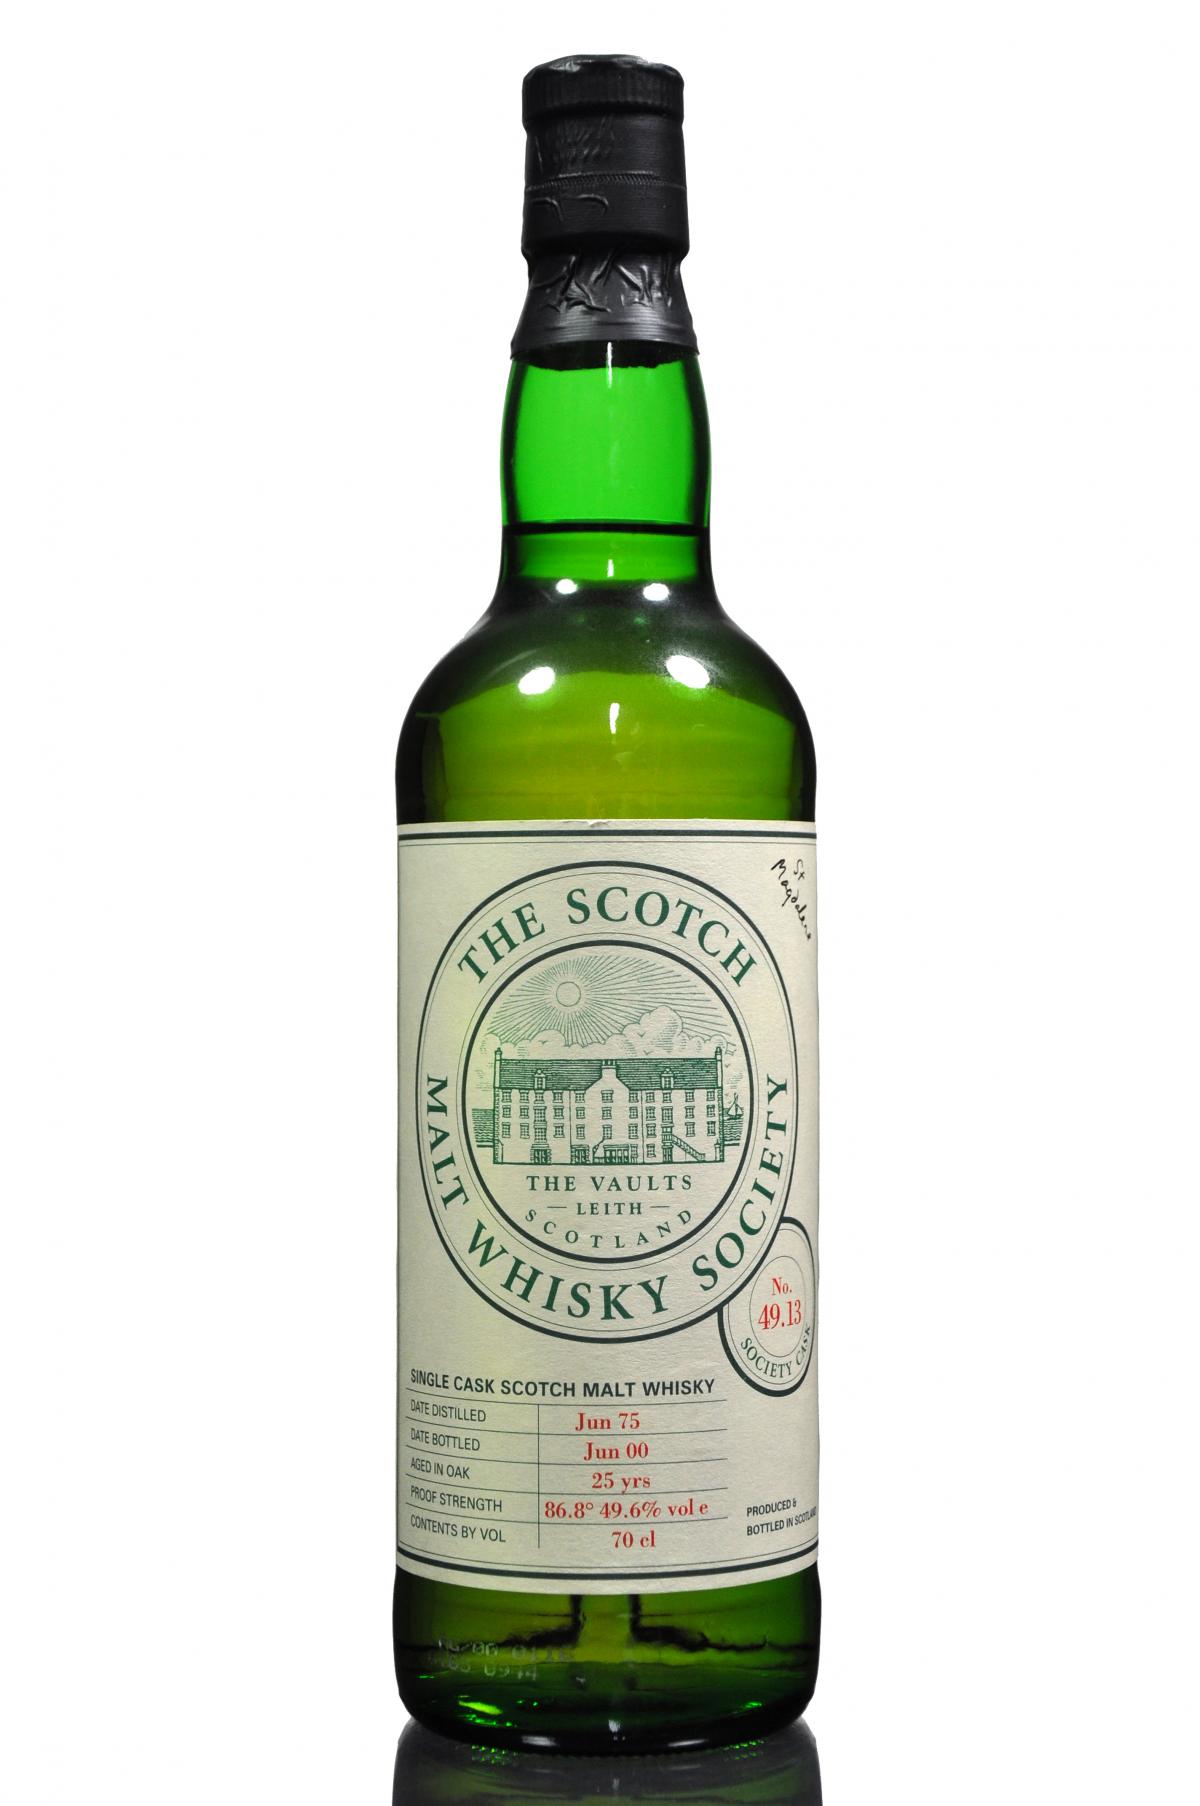 St Magdalene 1975-2000 - 25 Year Old - SMWS 49.13